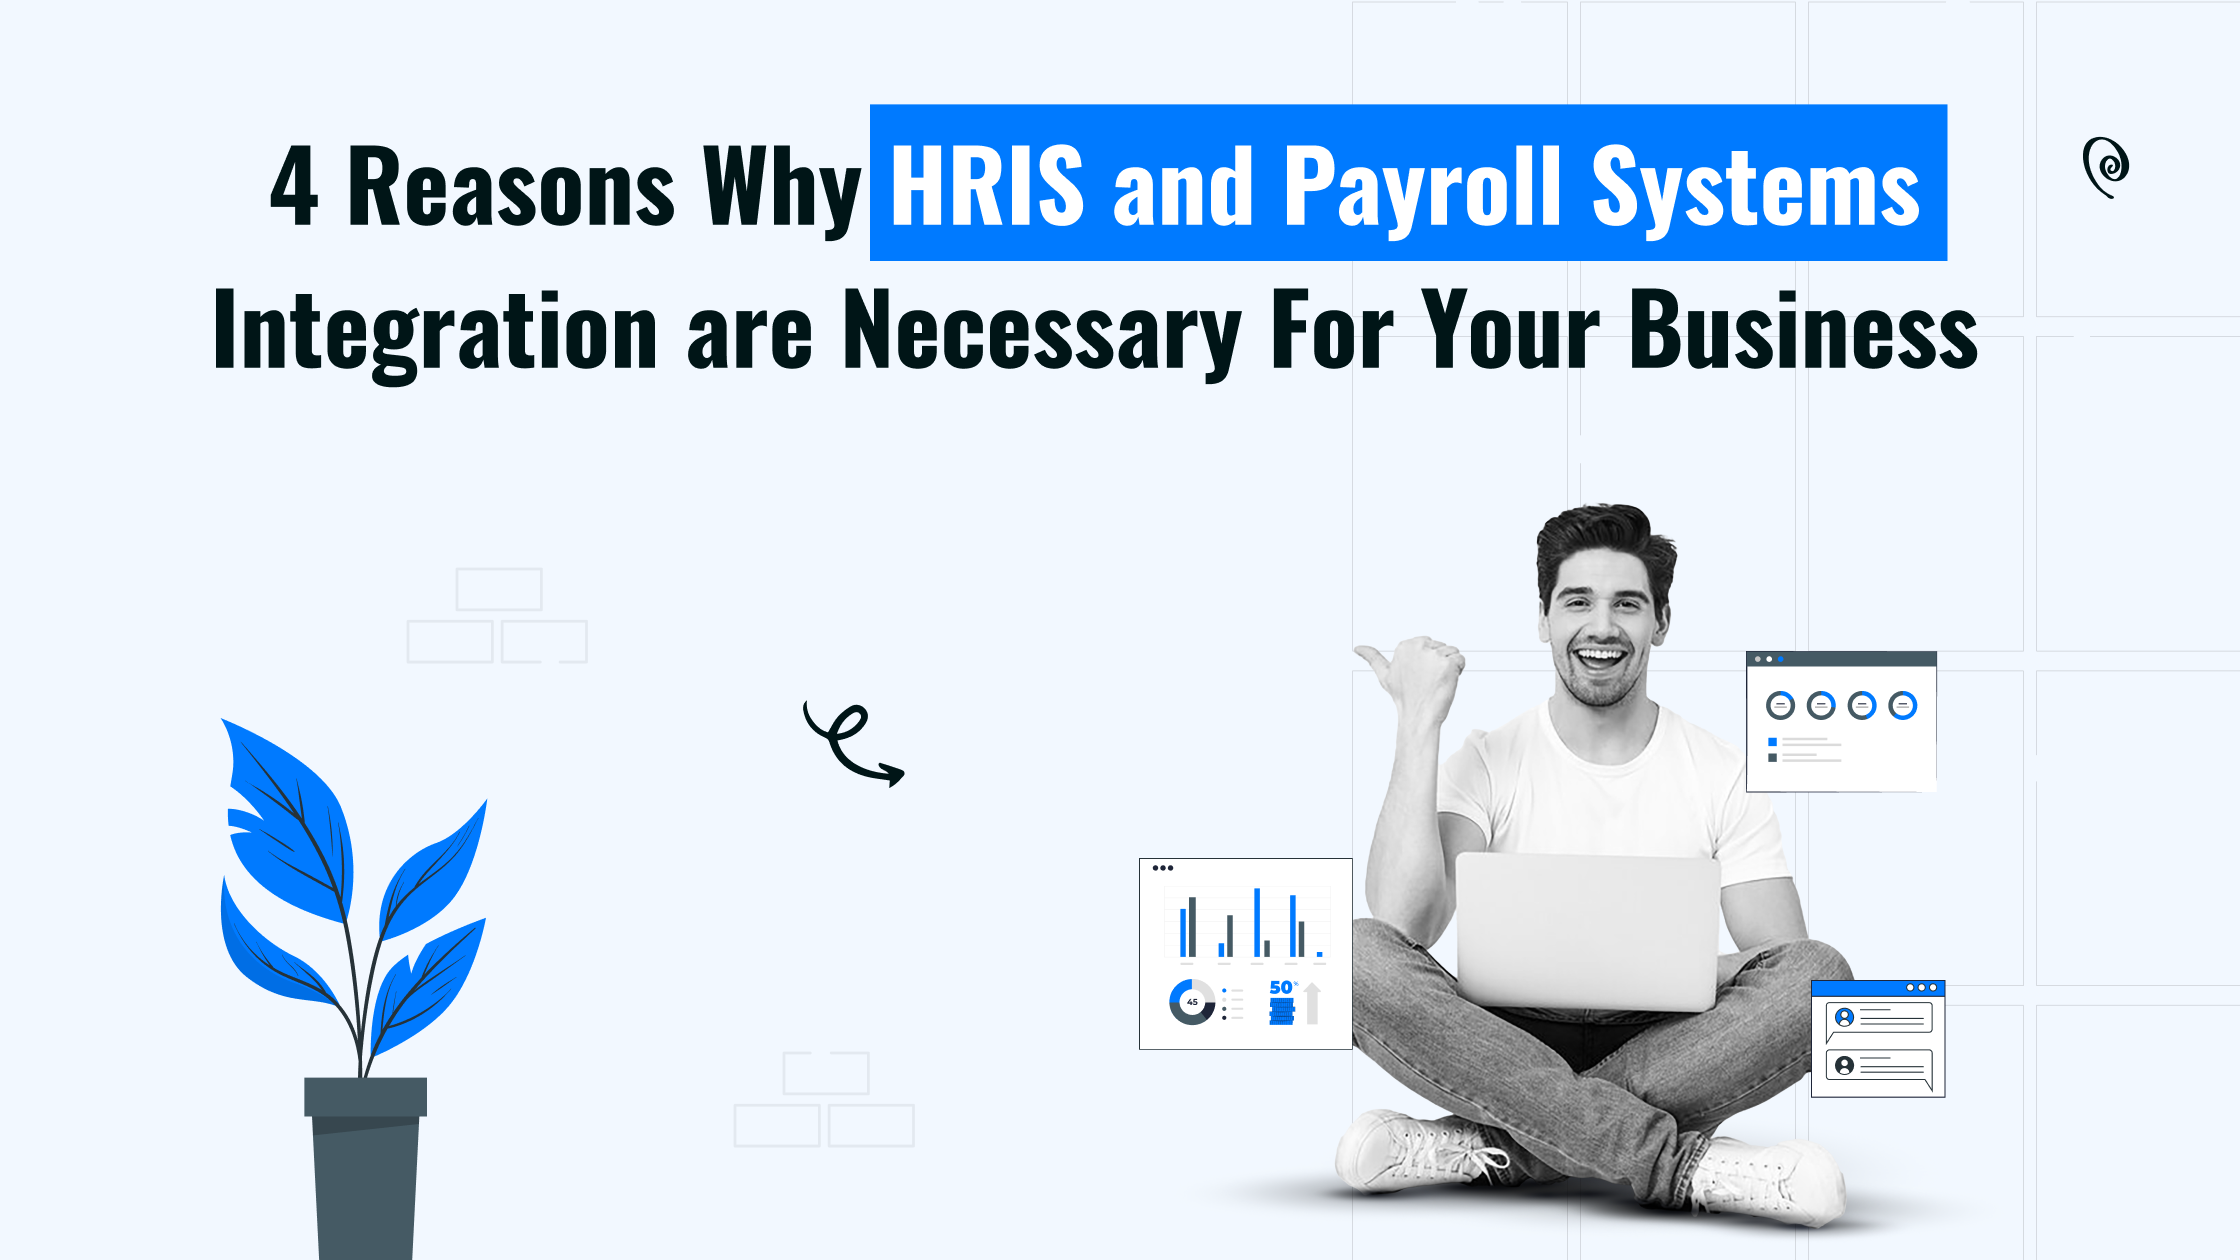 HRIS and Payroll Systems